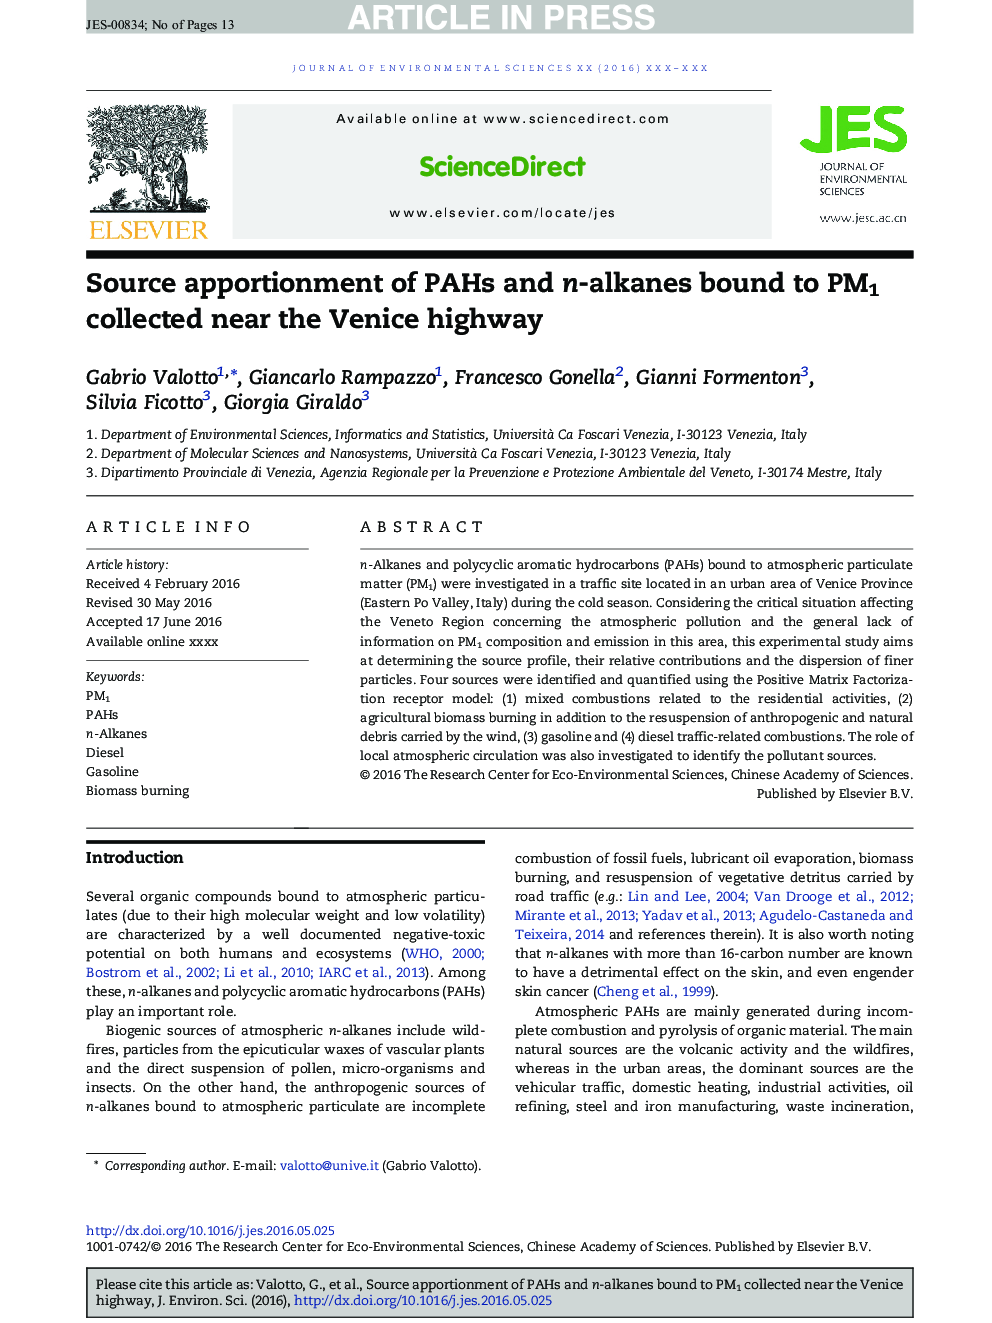 Source apportionment of PAHs and n-alkanes bound to PM1 collected near the Venice highway